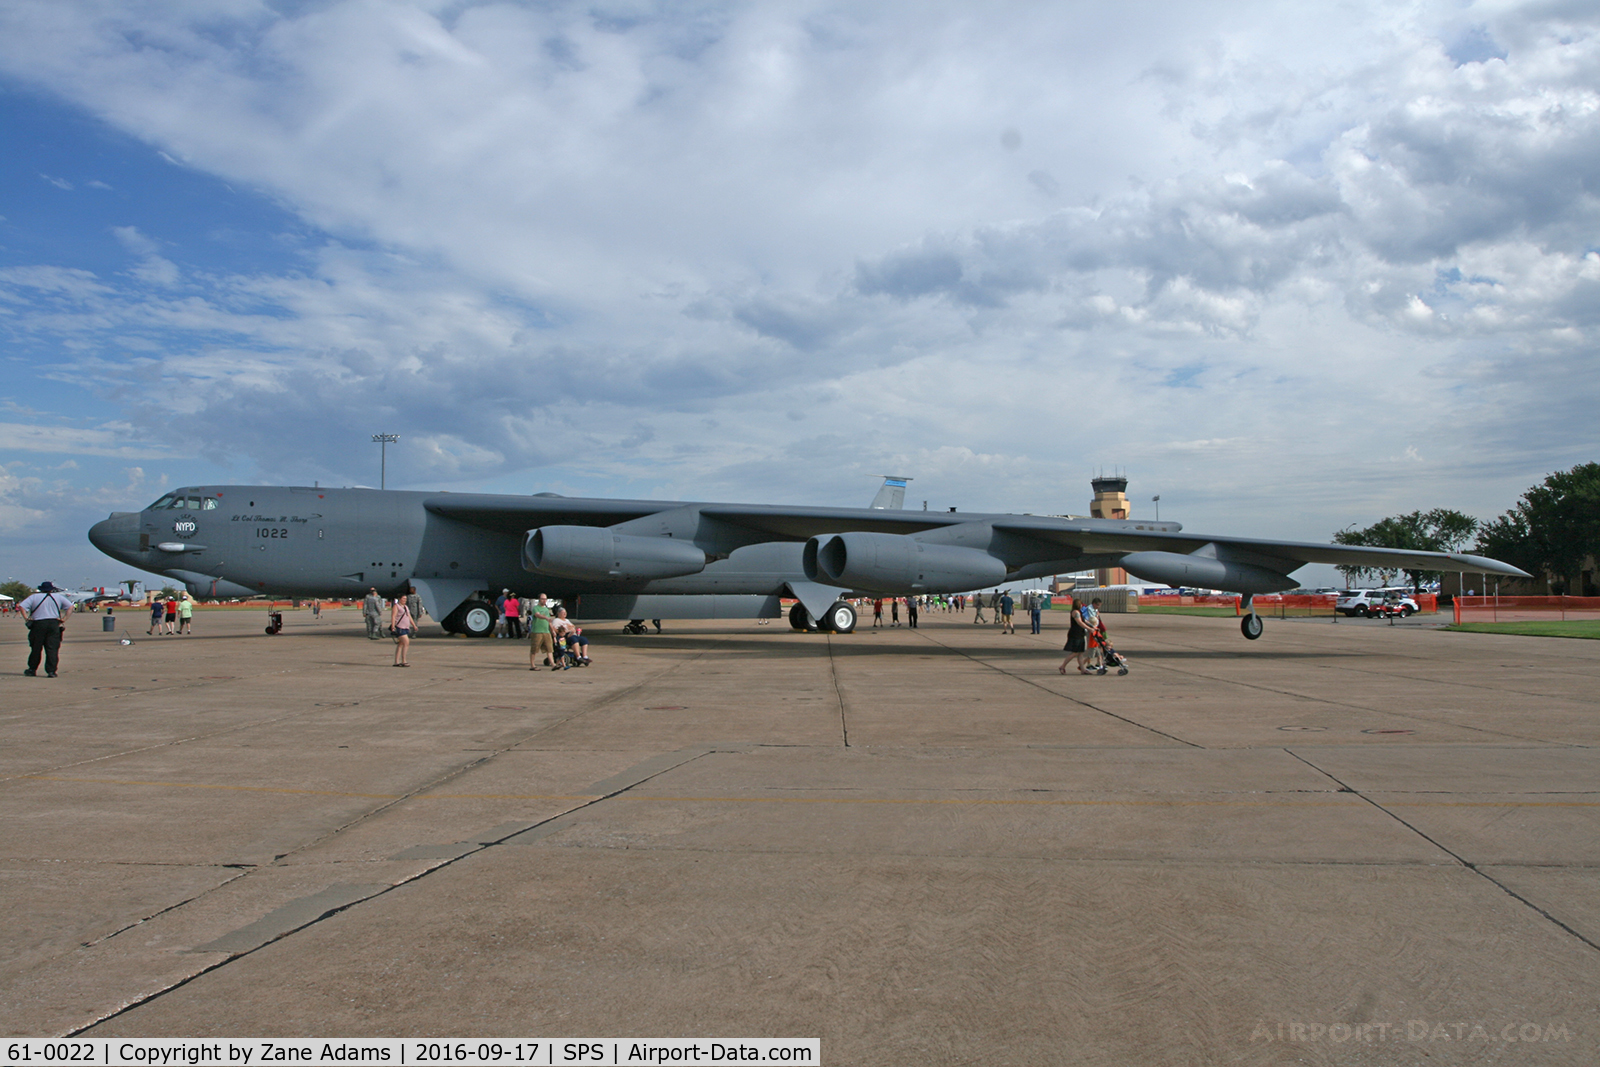 61-0022, 1961 Boeing B-52H Stratofortress C/N 464449, At the 2017 Sheppard AFB Airshow